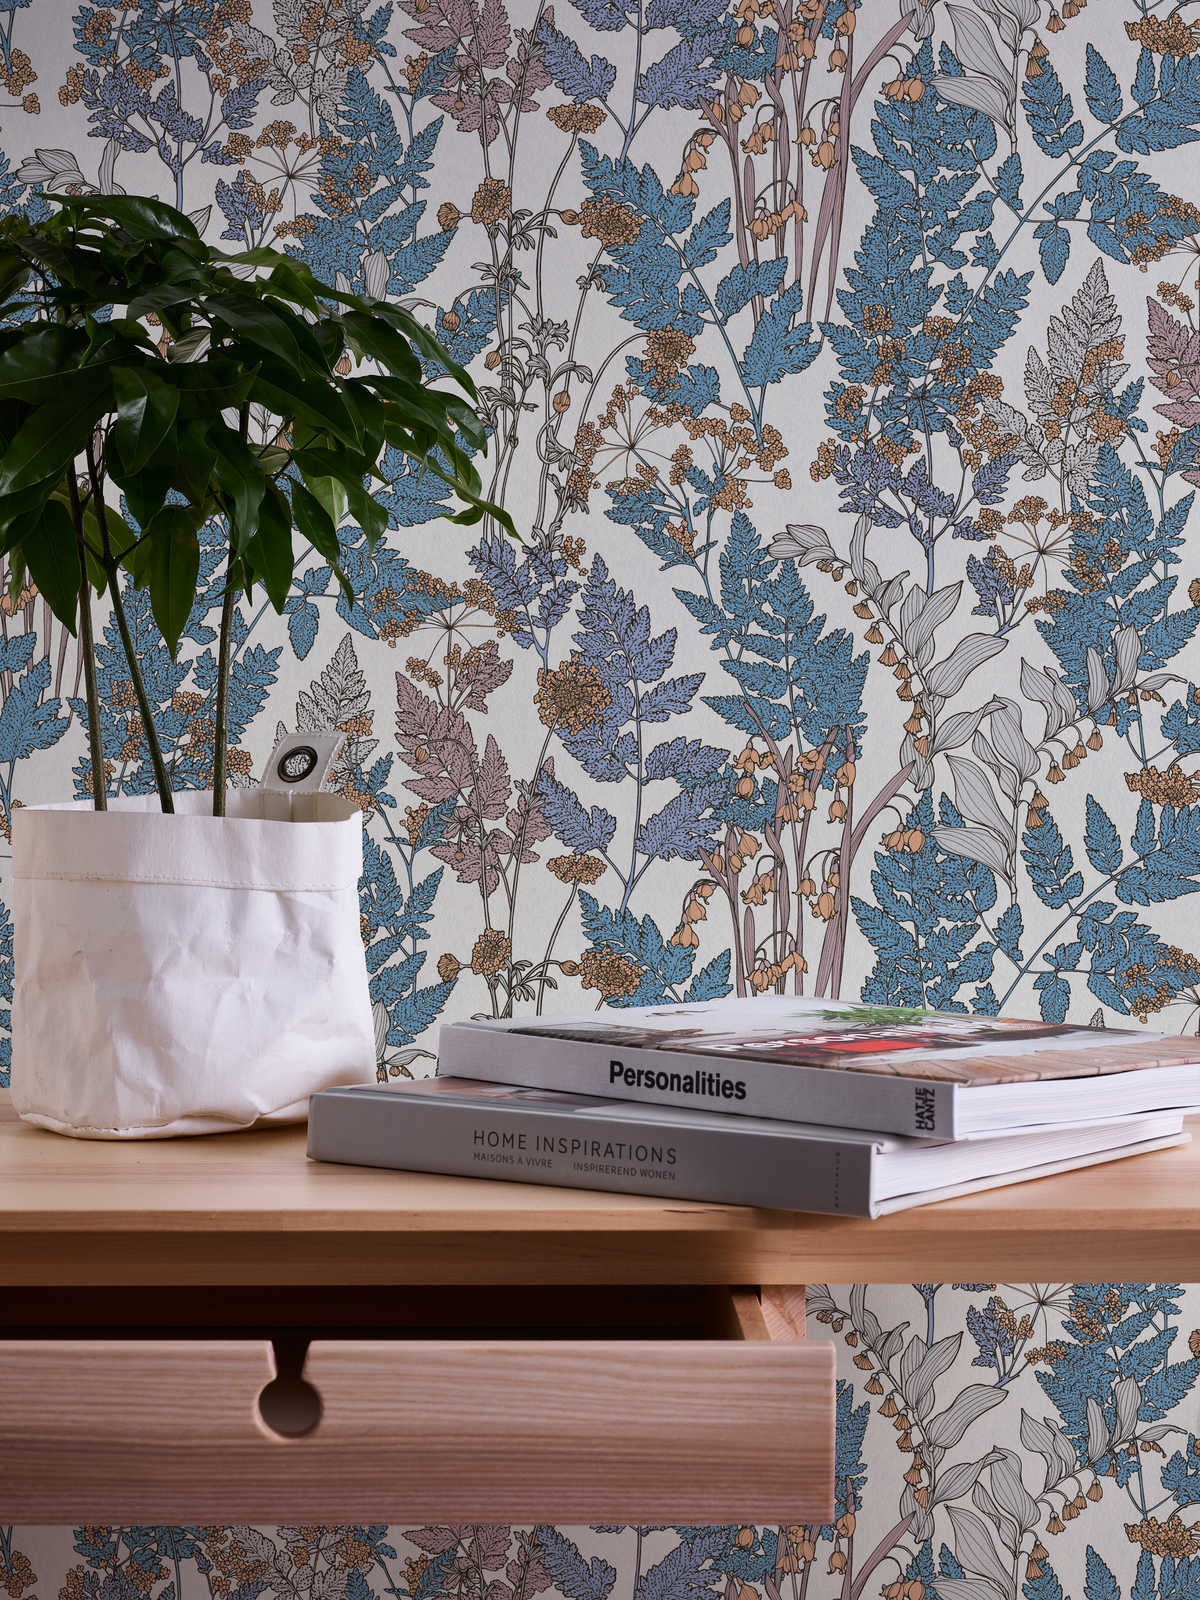             Nature wallpaper leaves & flowers in modern country style - blue, cream, beige
        